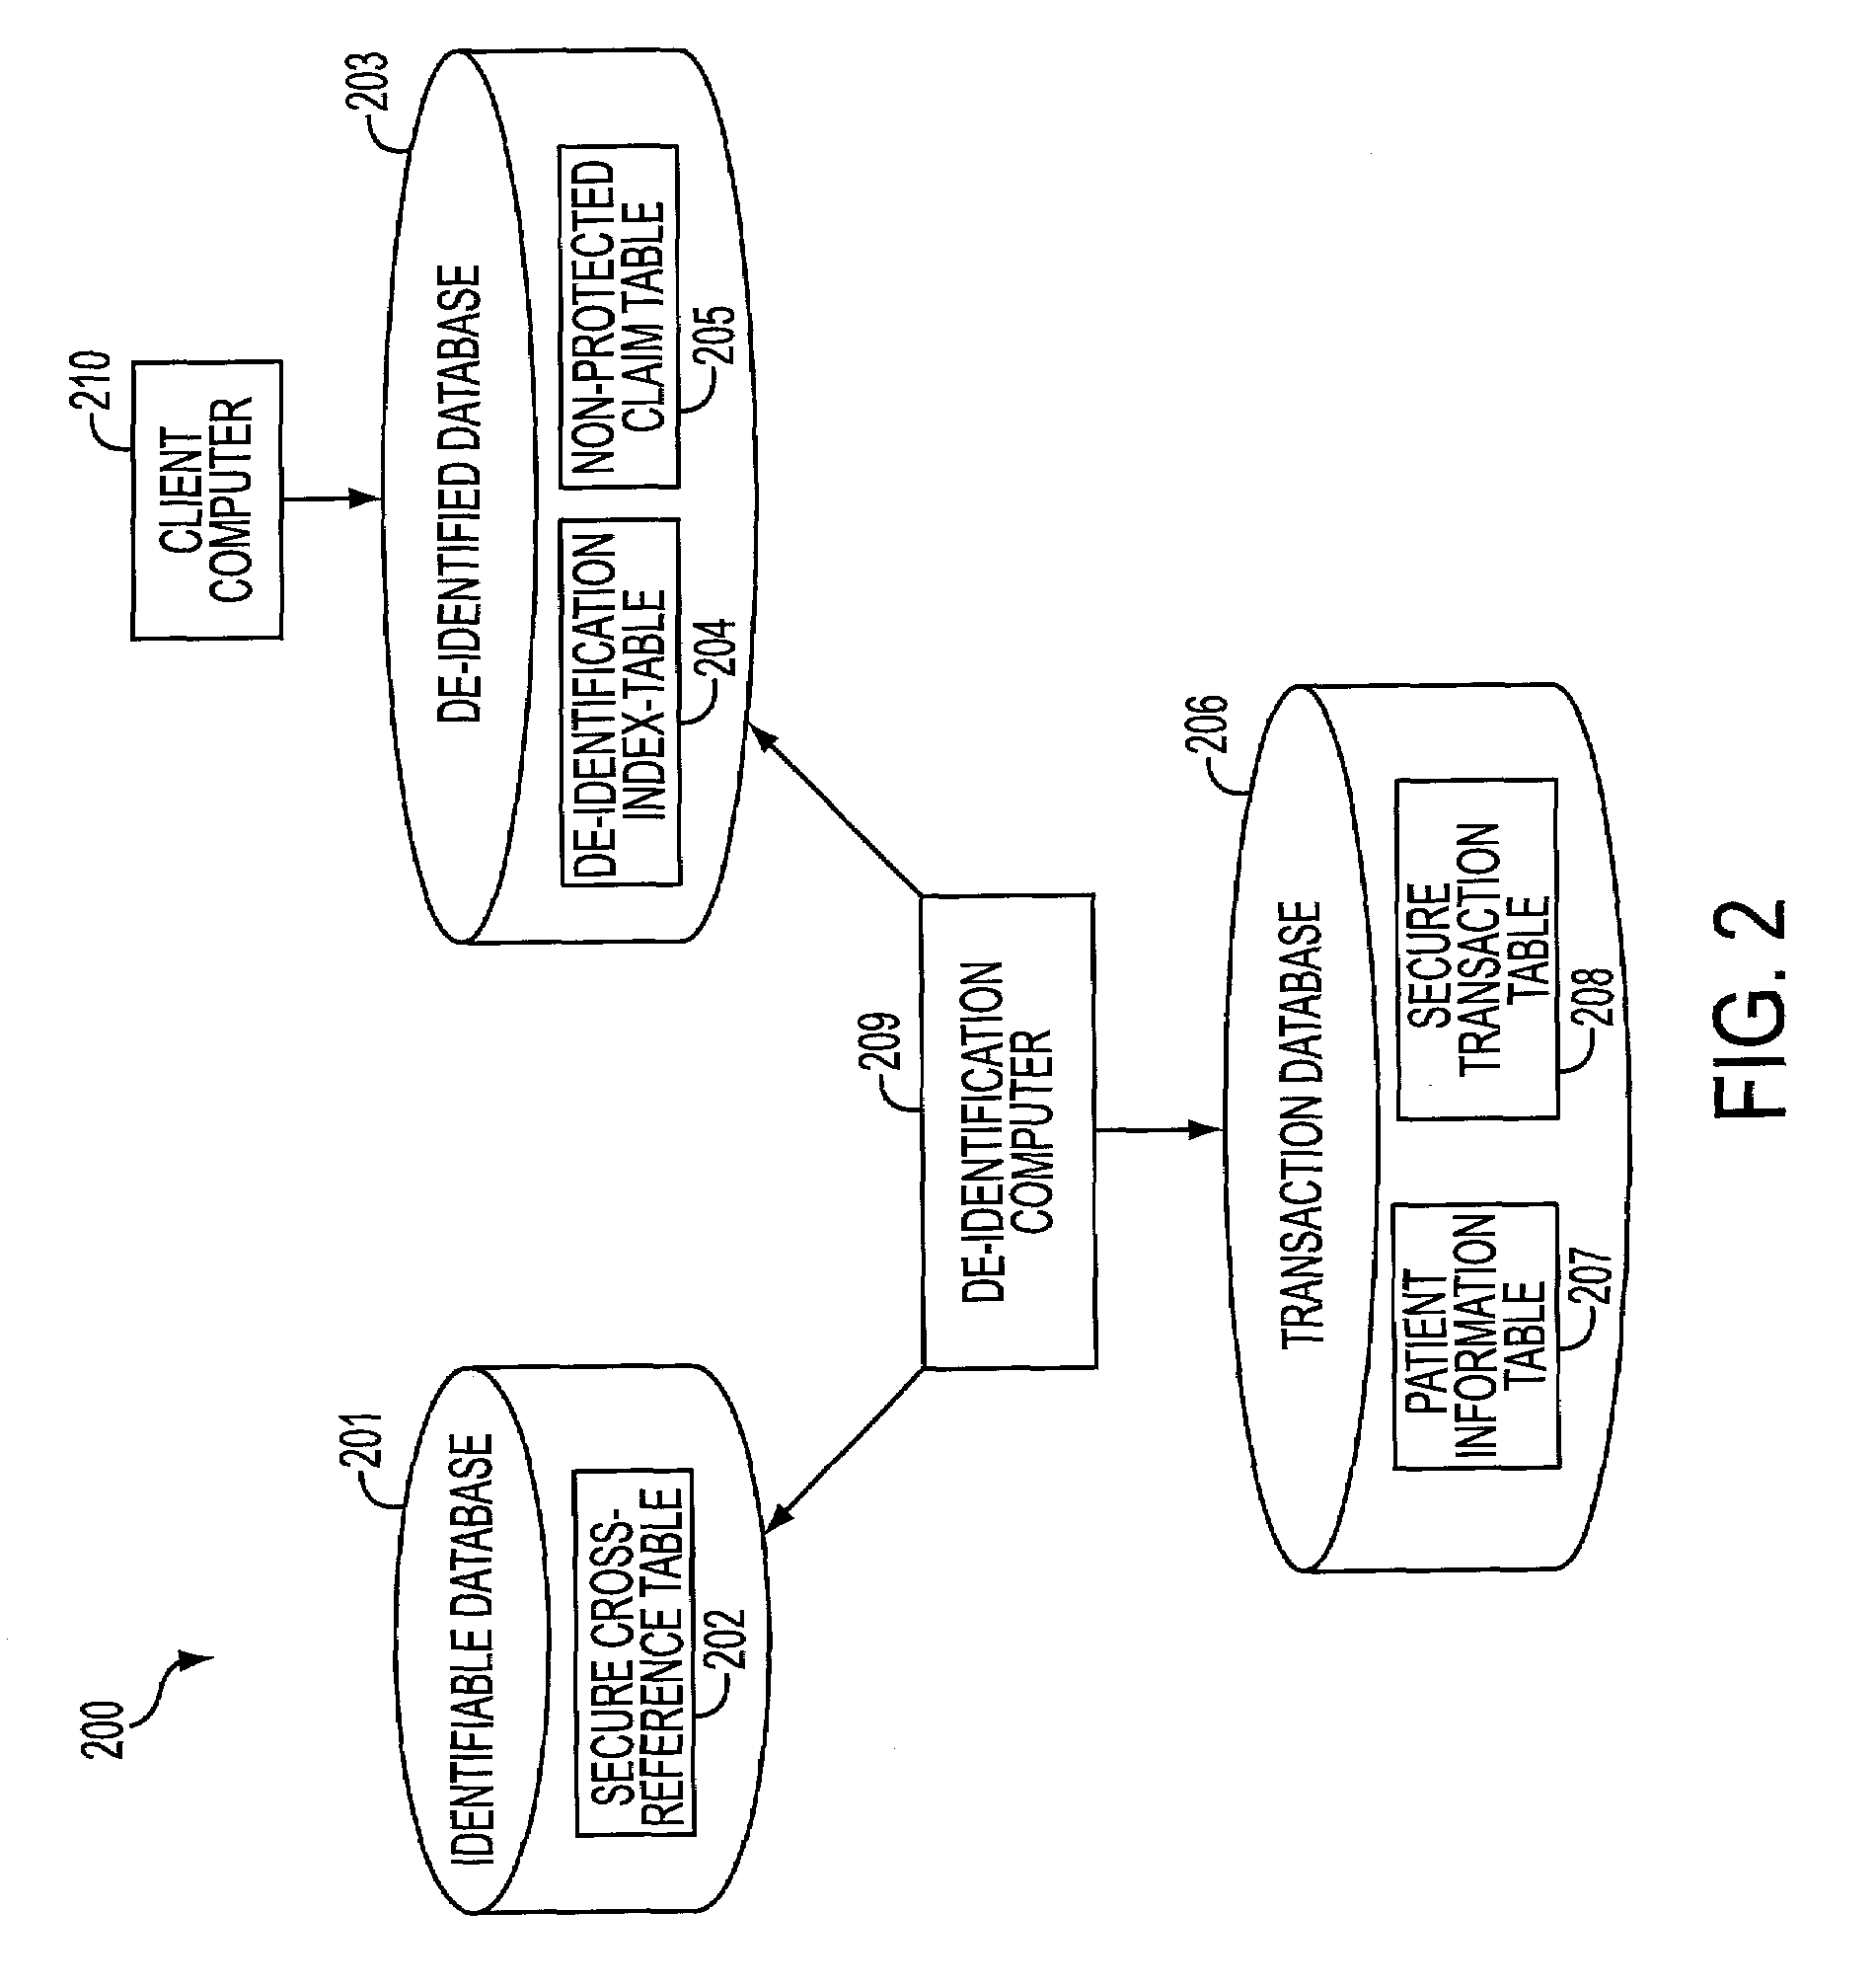 System and method of de-identifying data